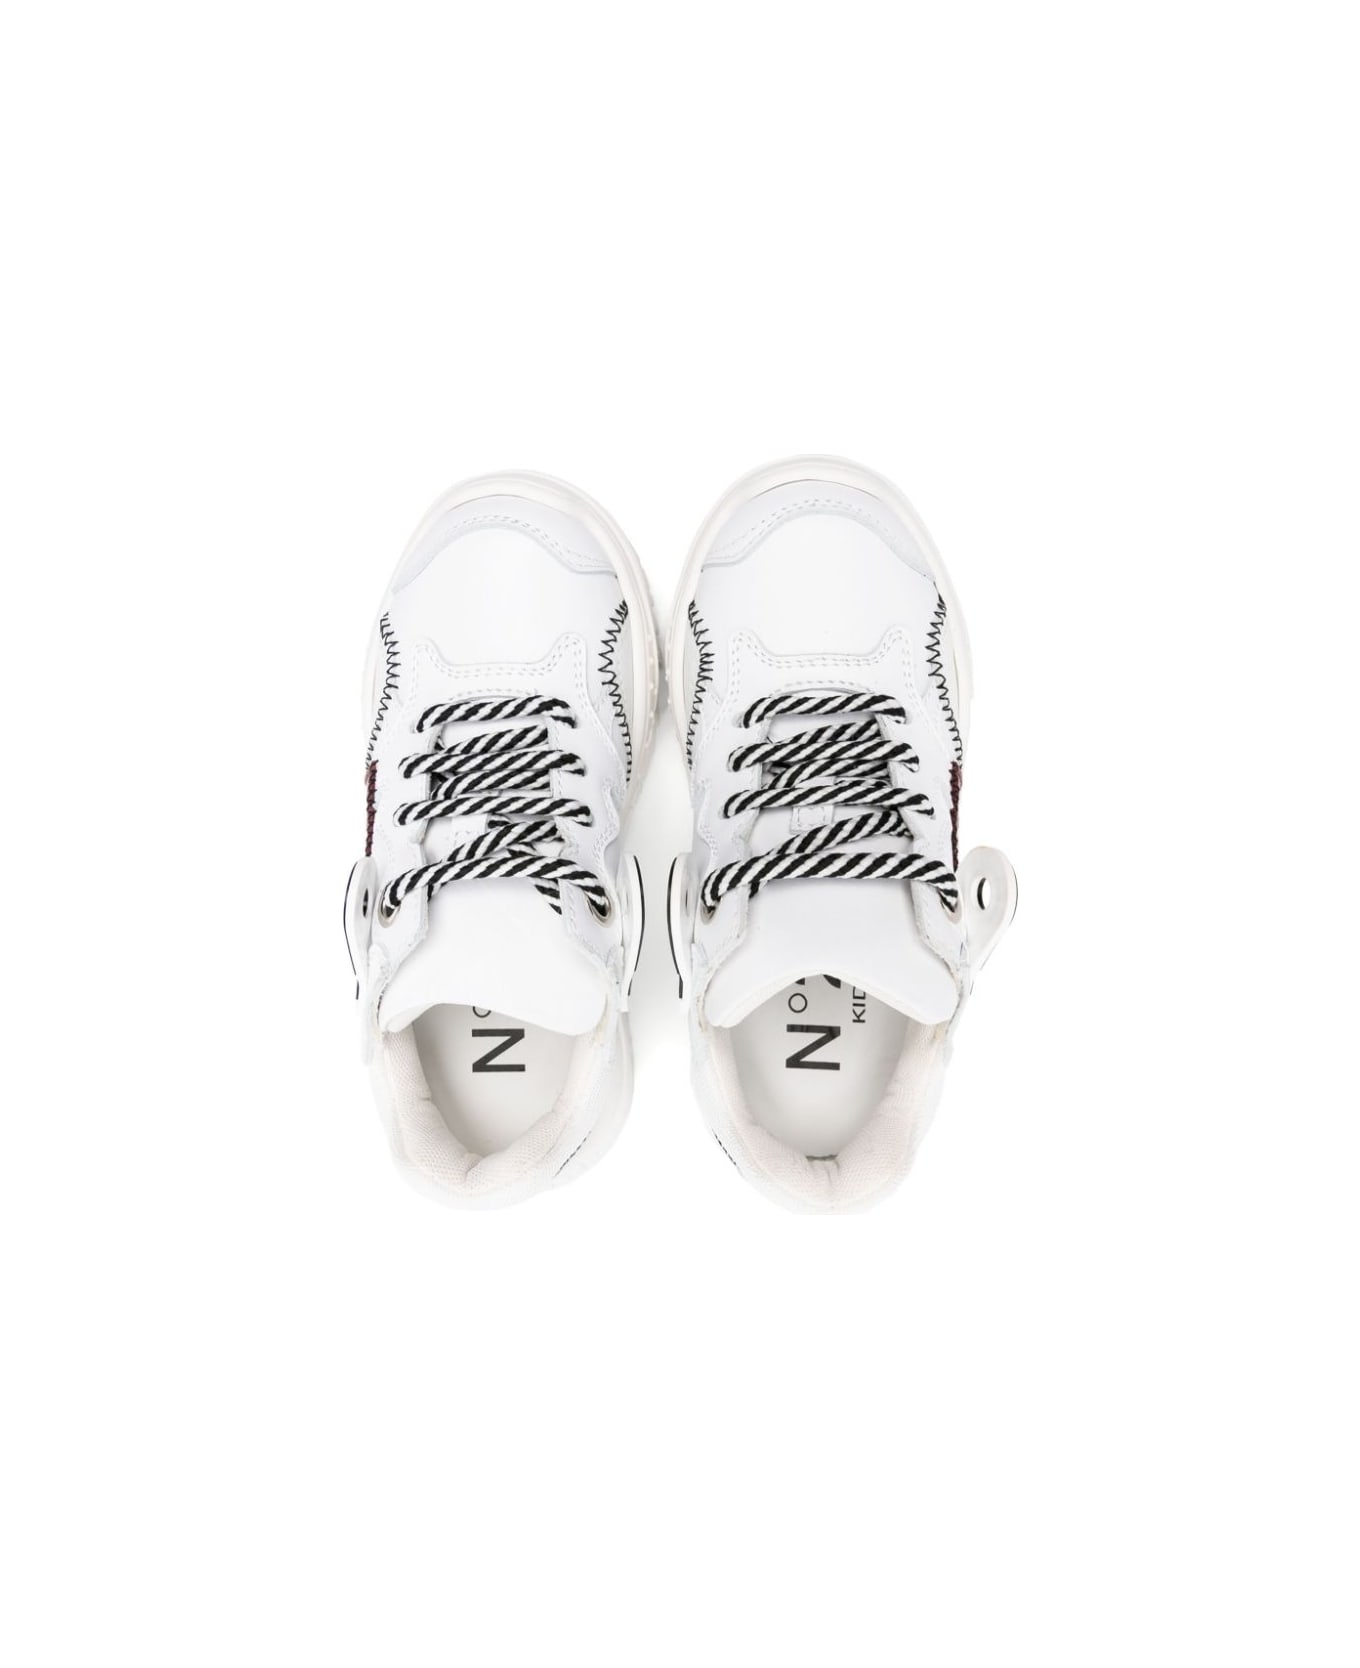 N.21 Chunky Sneakers With Print - White シューズ